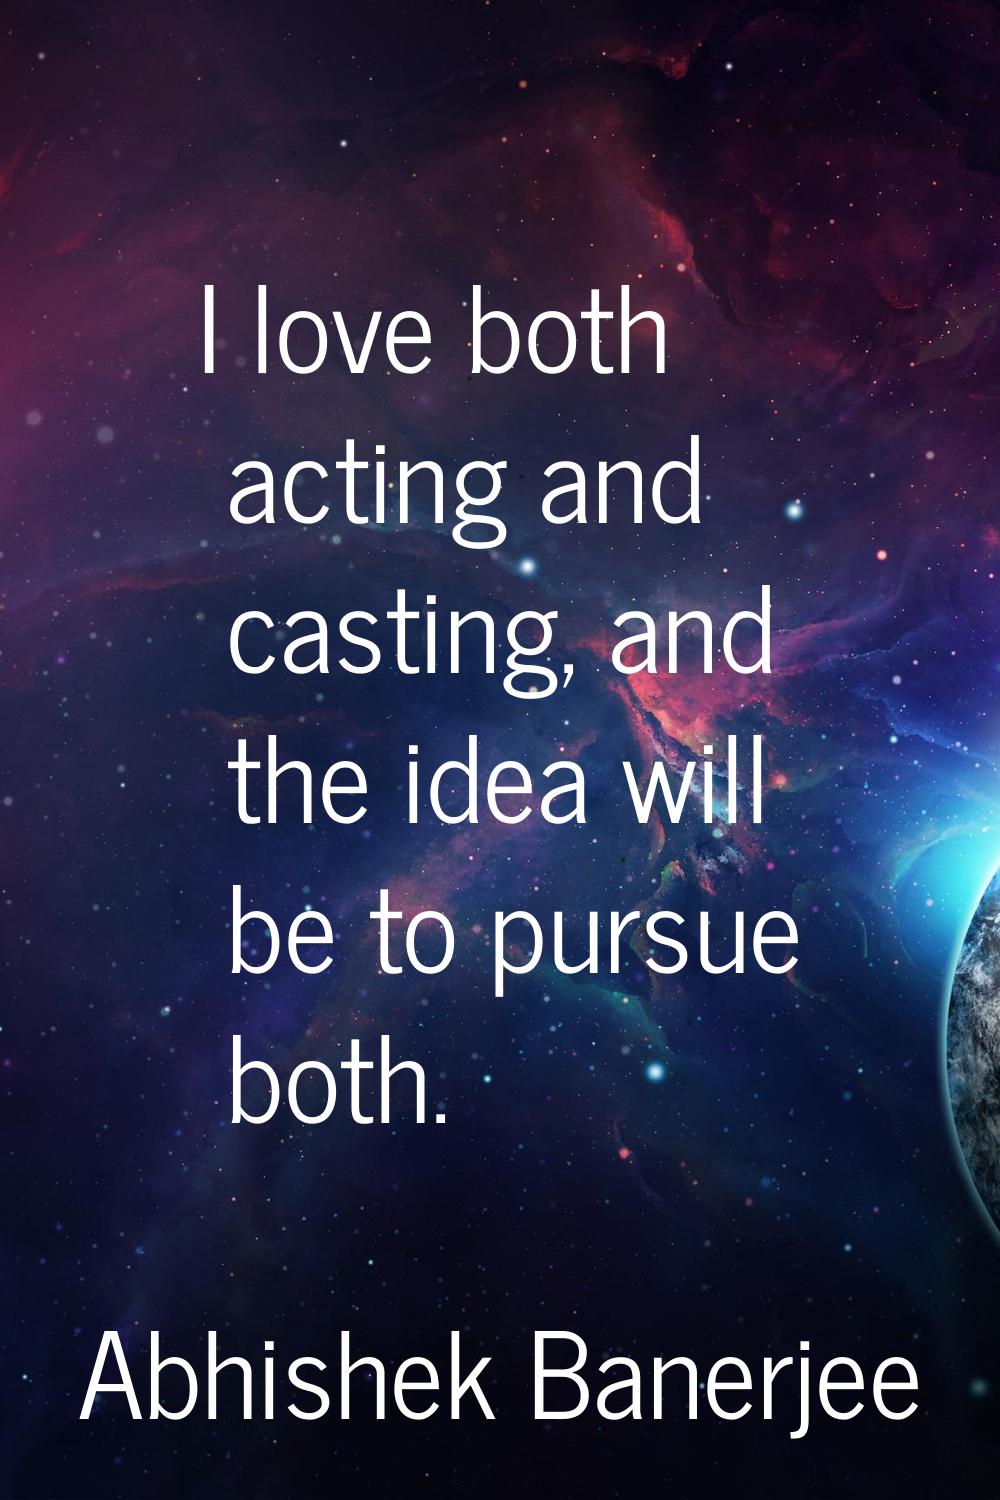 I love both acting and casting, and the idea will be to pursue both.